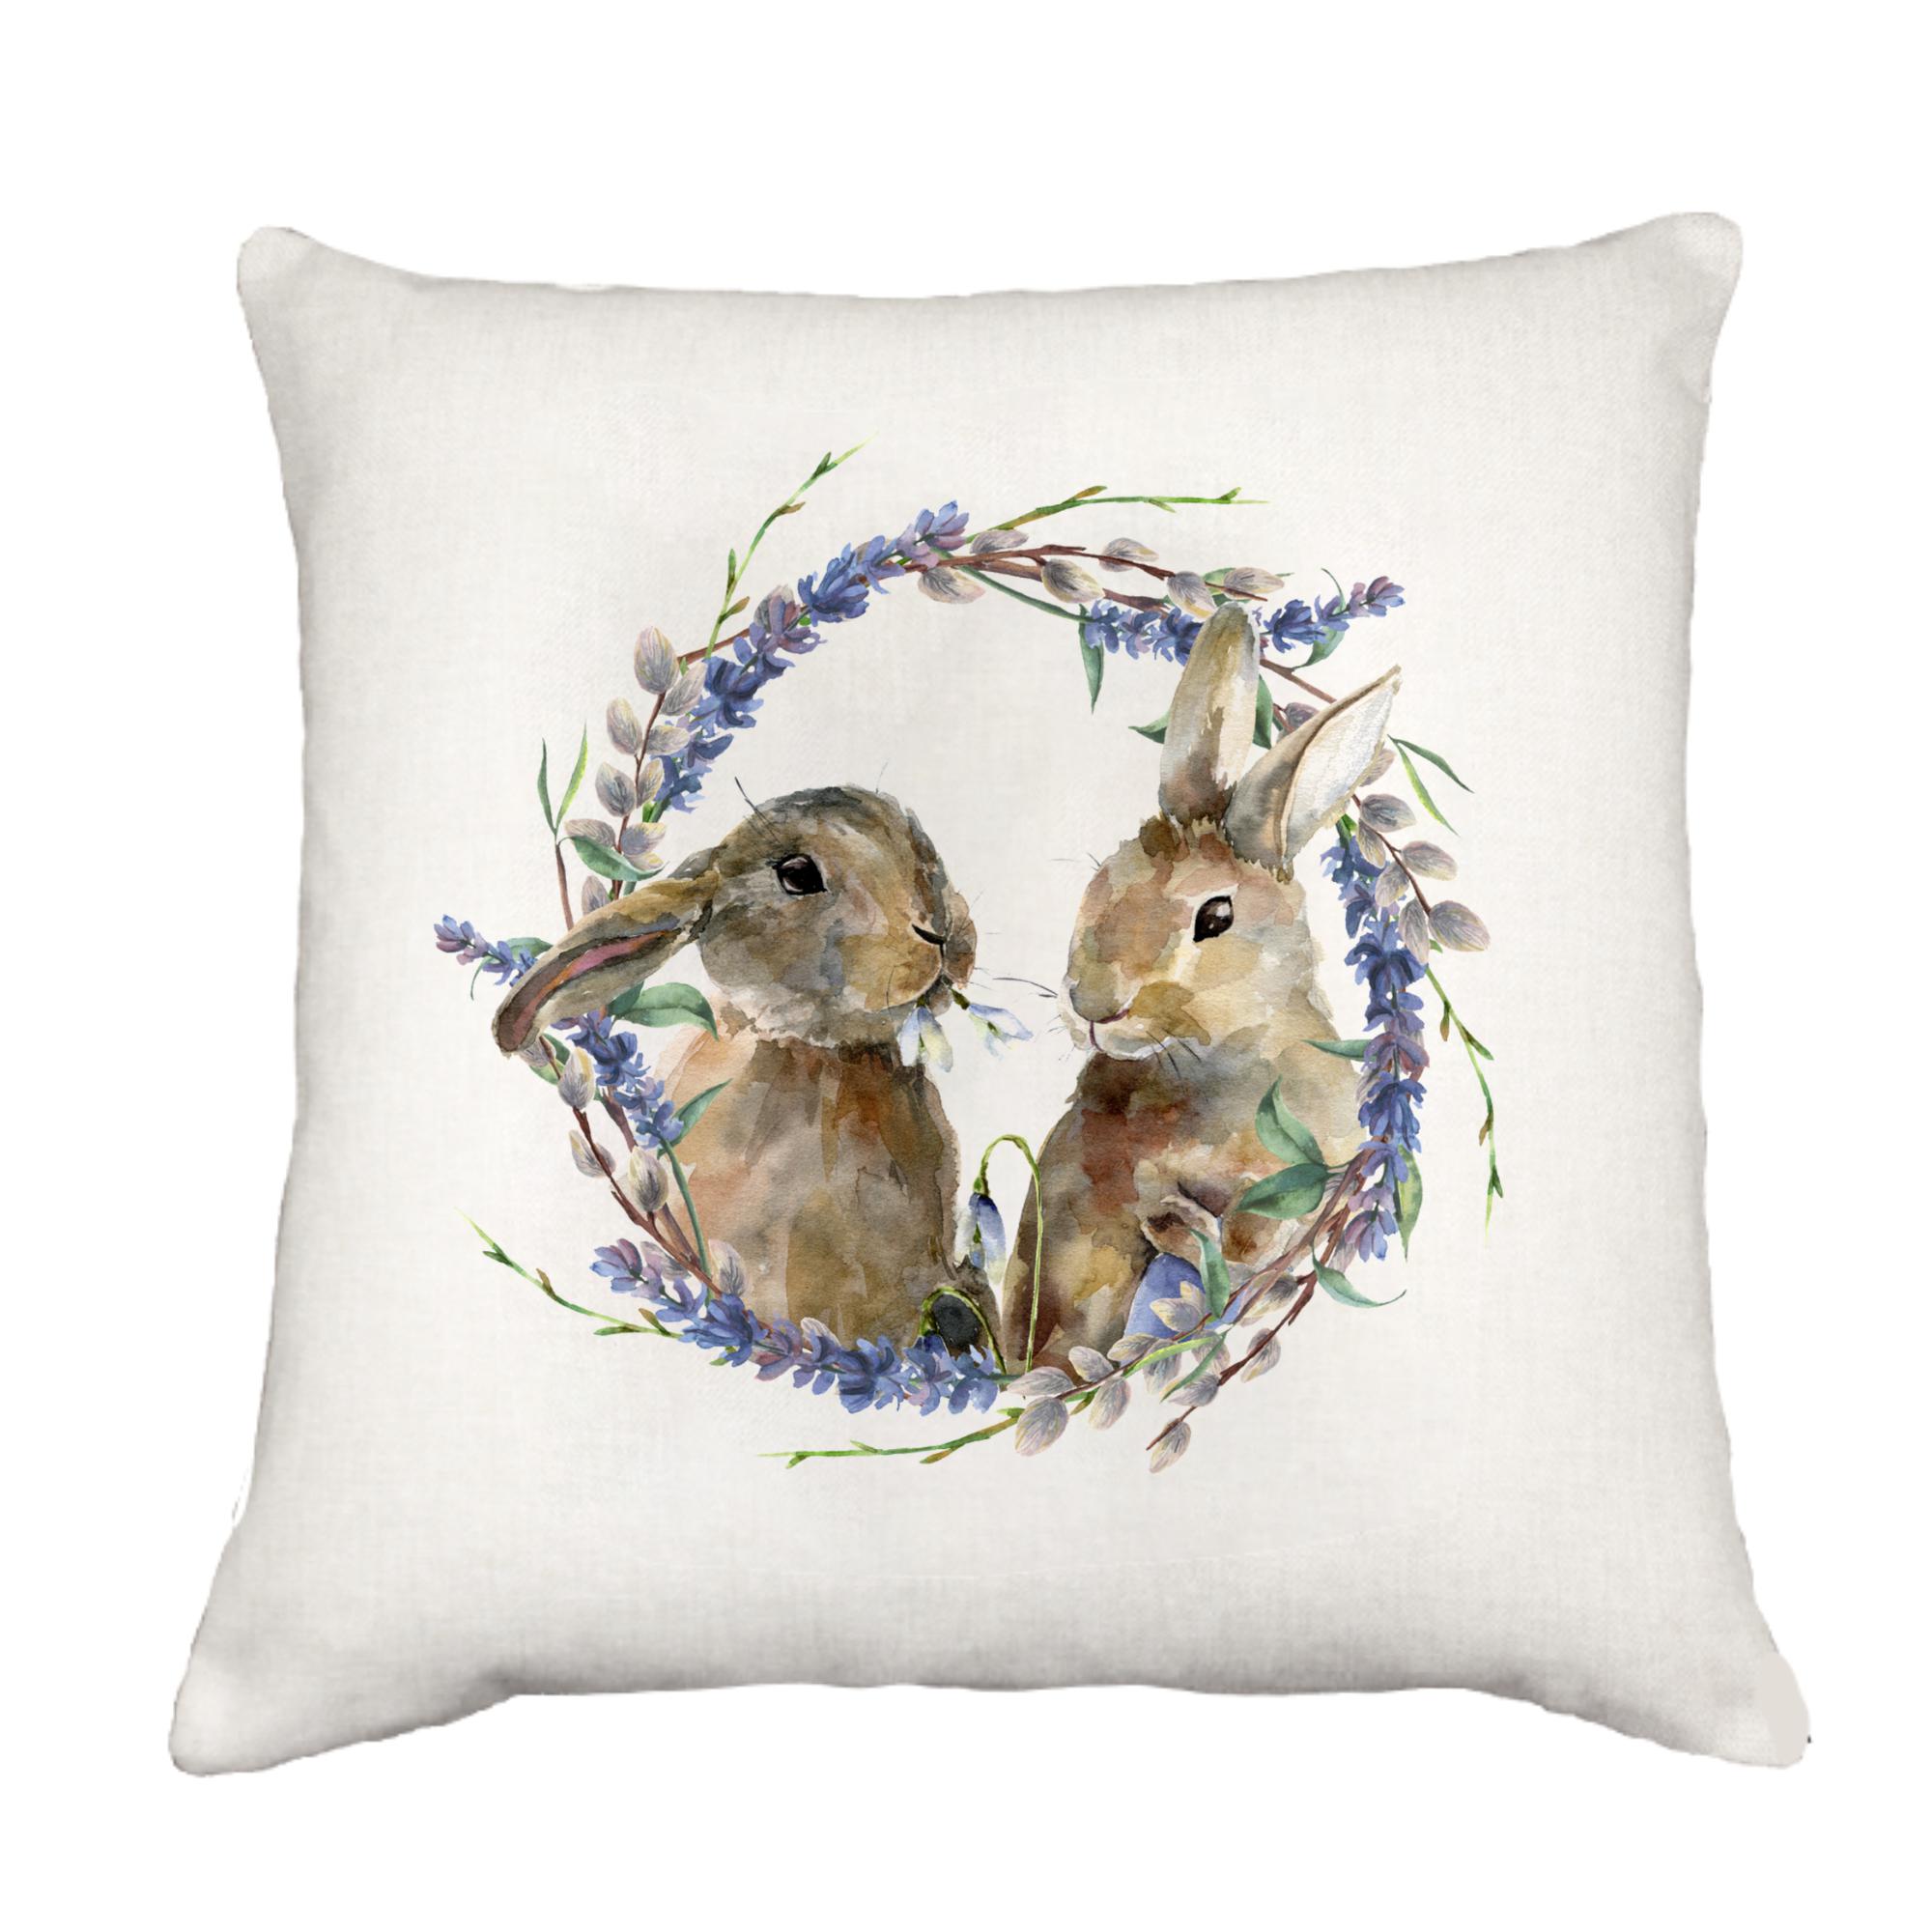 Two Bunnies In Wreath Down Throw Pillow